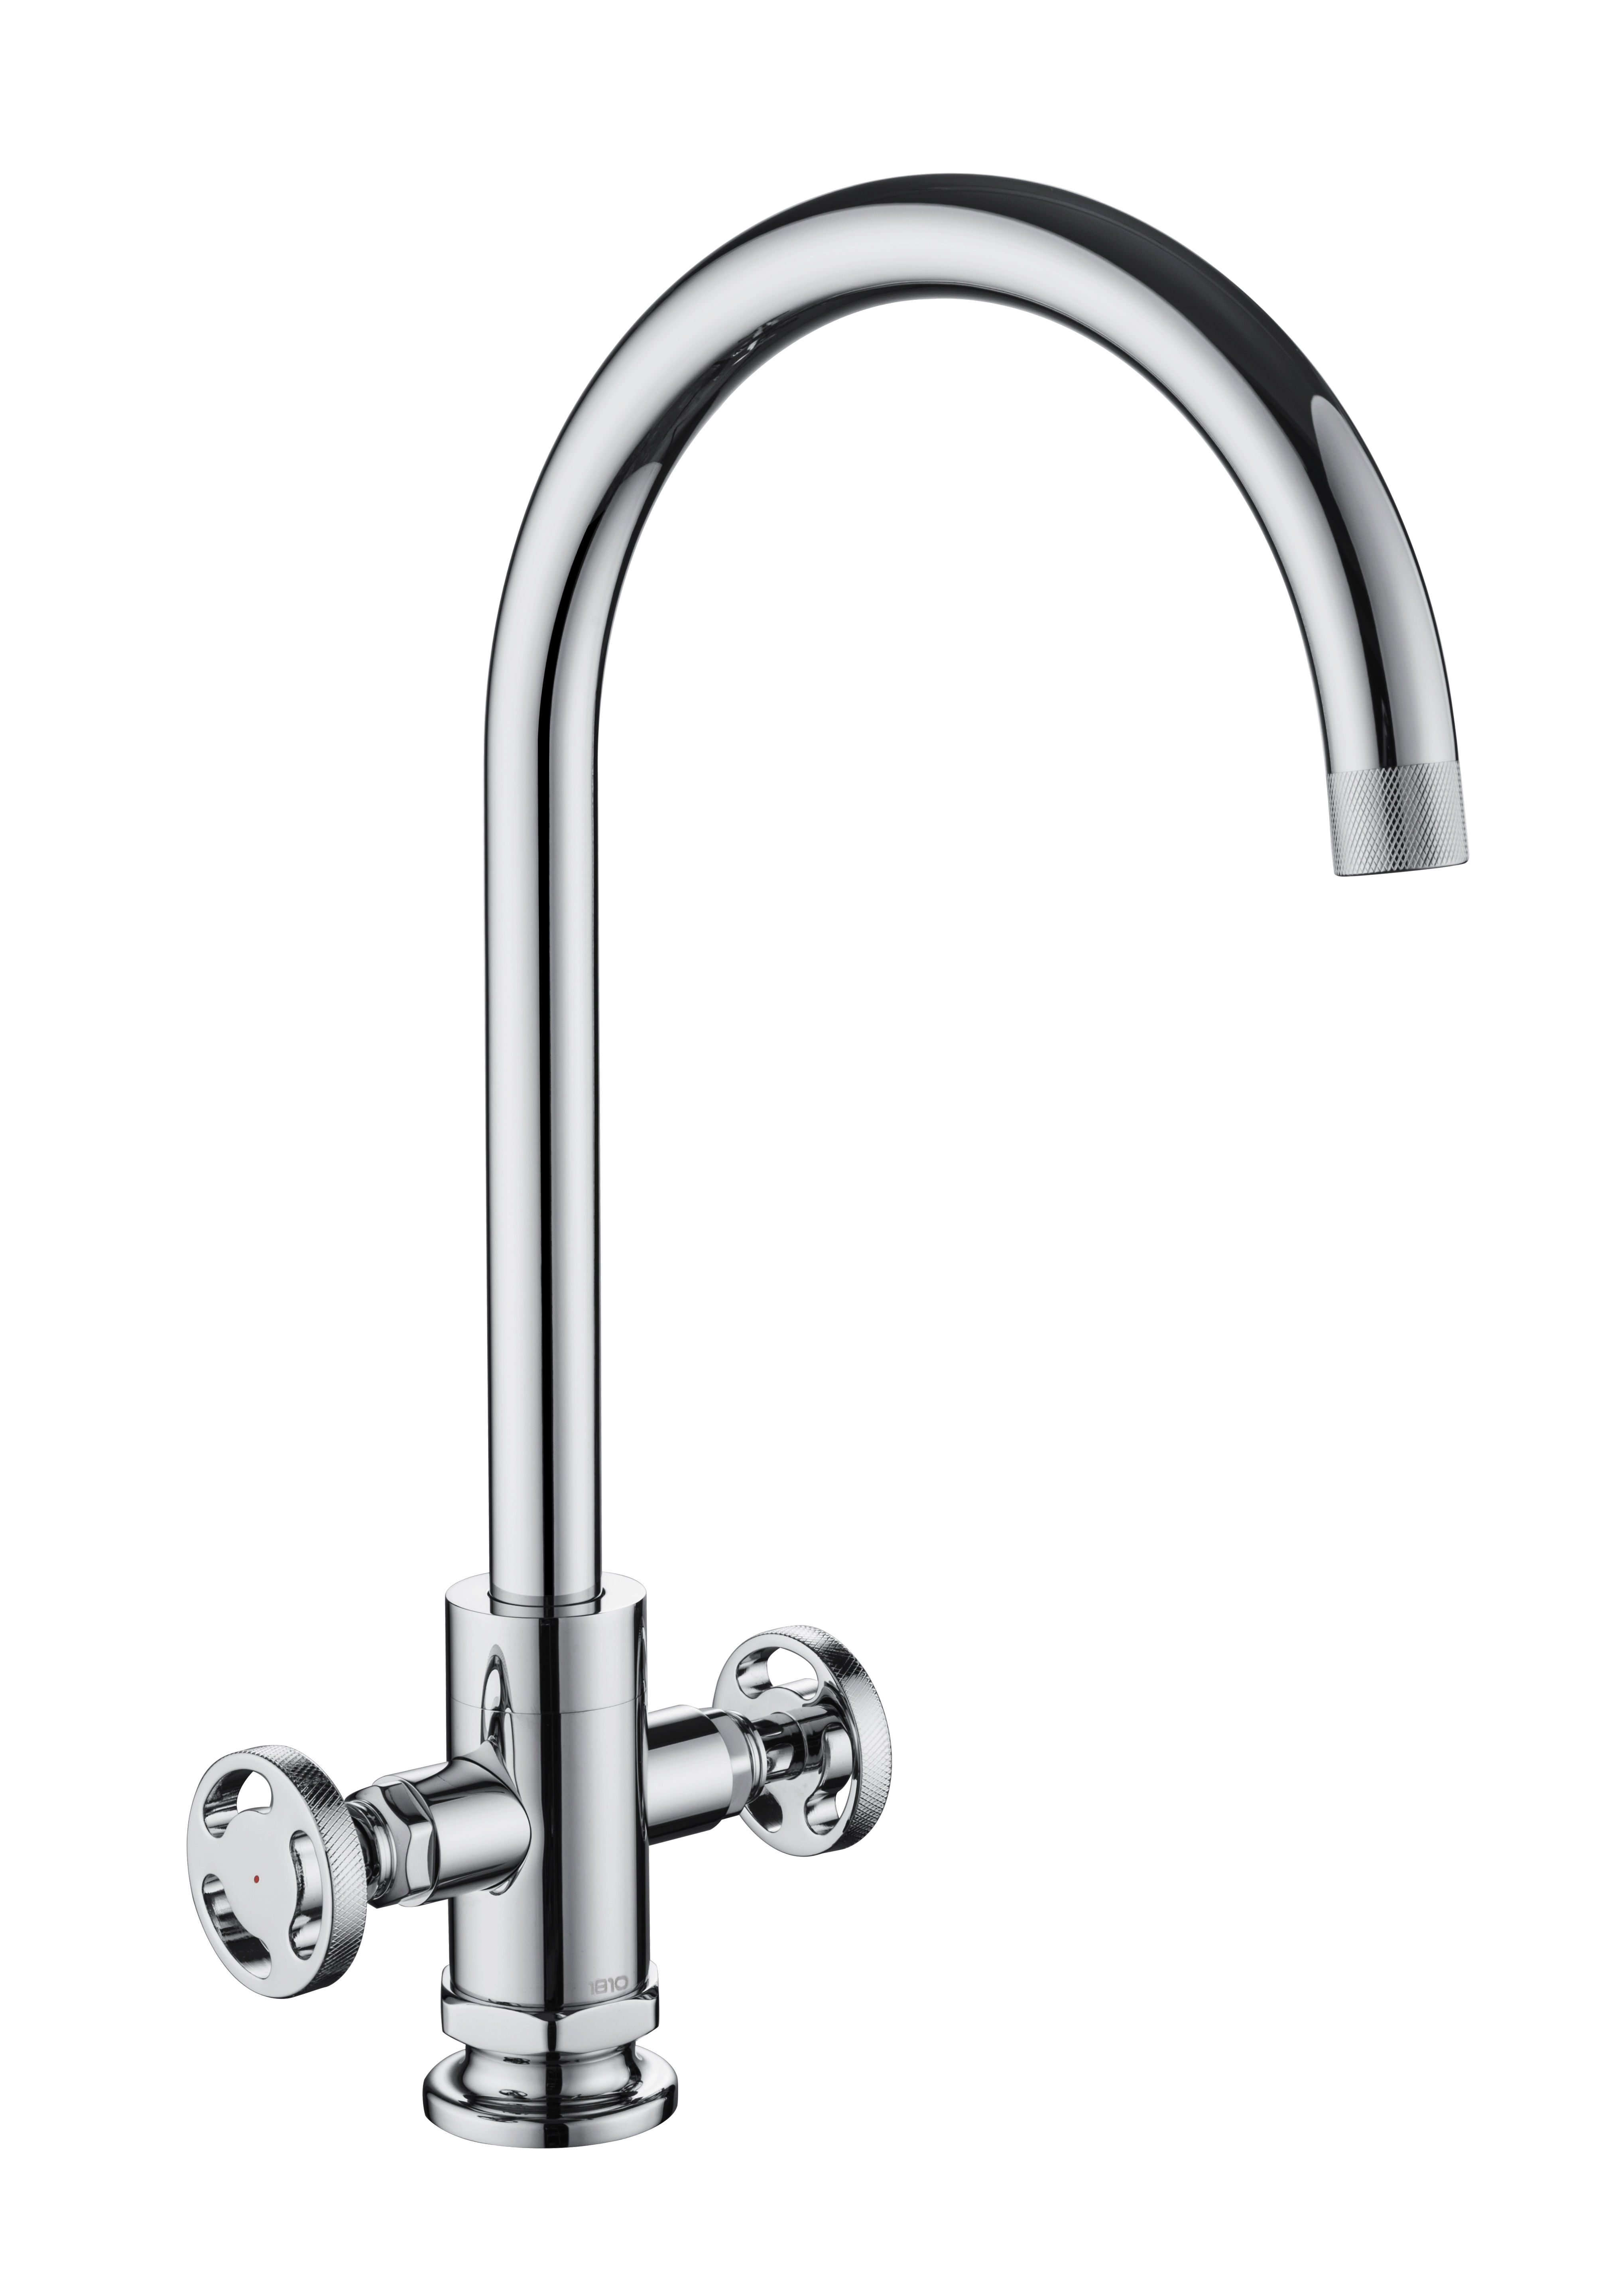 Chrome Henry Holt Twin Lever Kitchen Taps